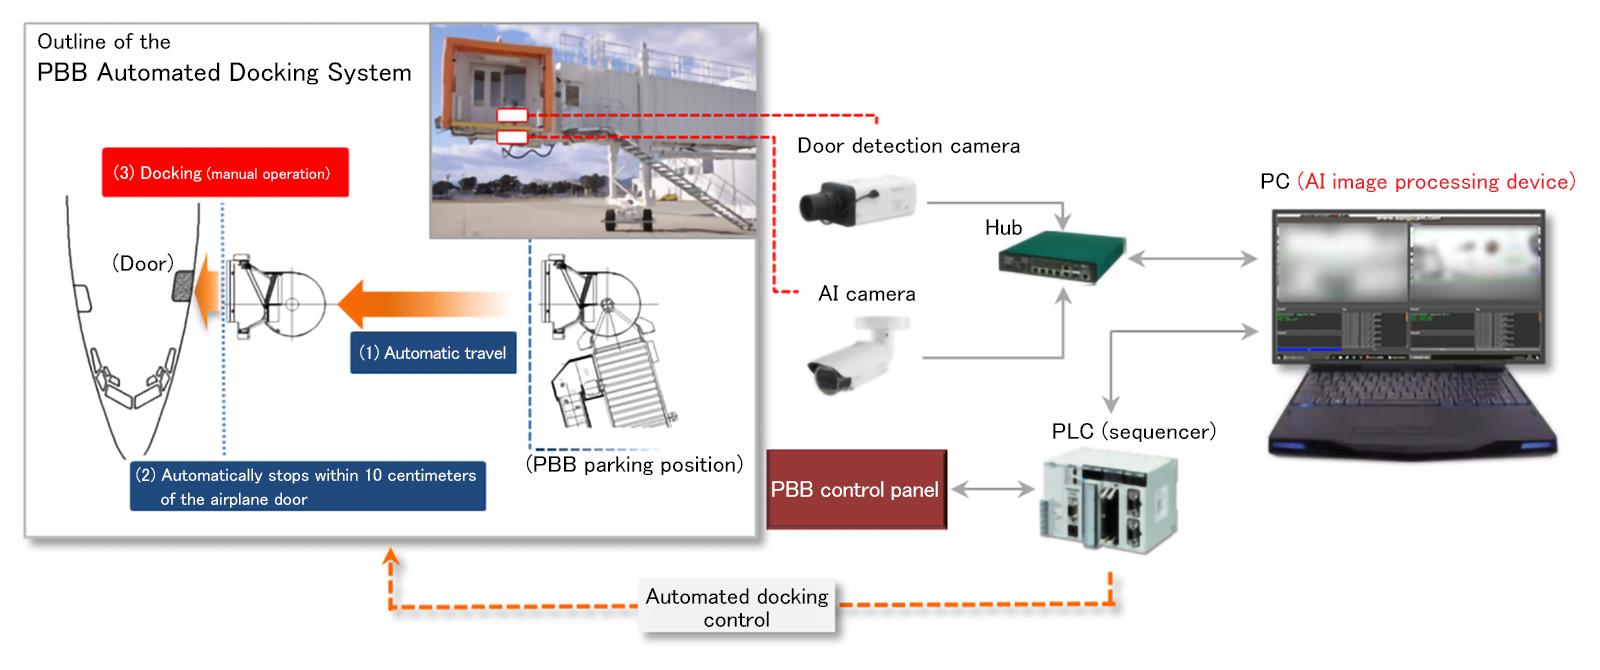 figure: Outline of the PBB Automated docking system (AI docking system)